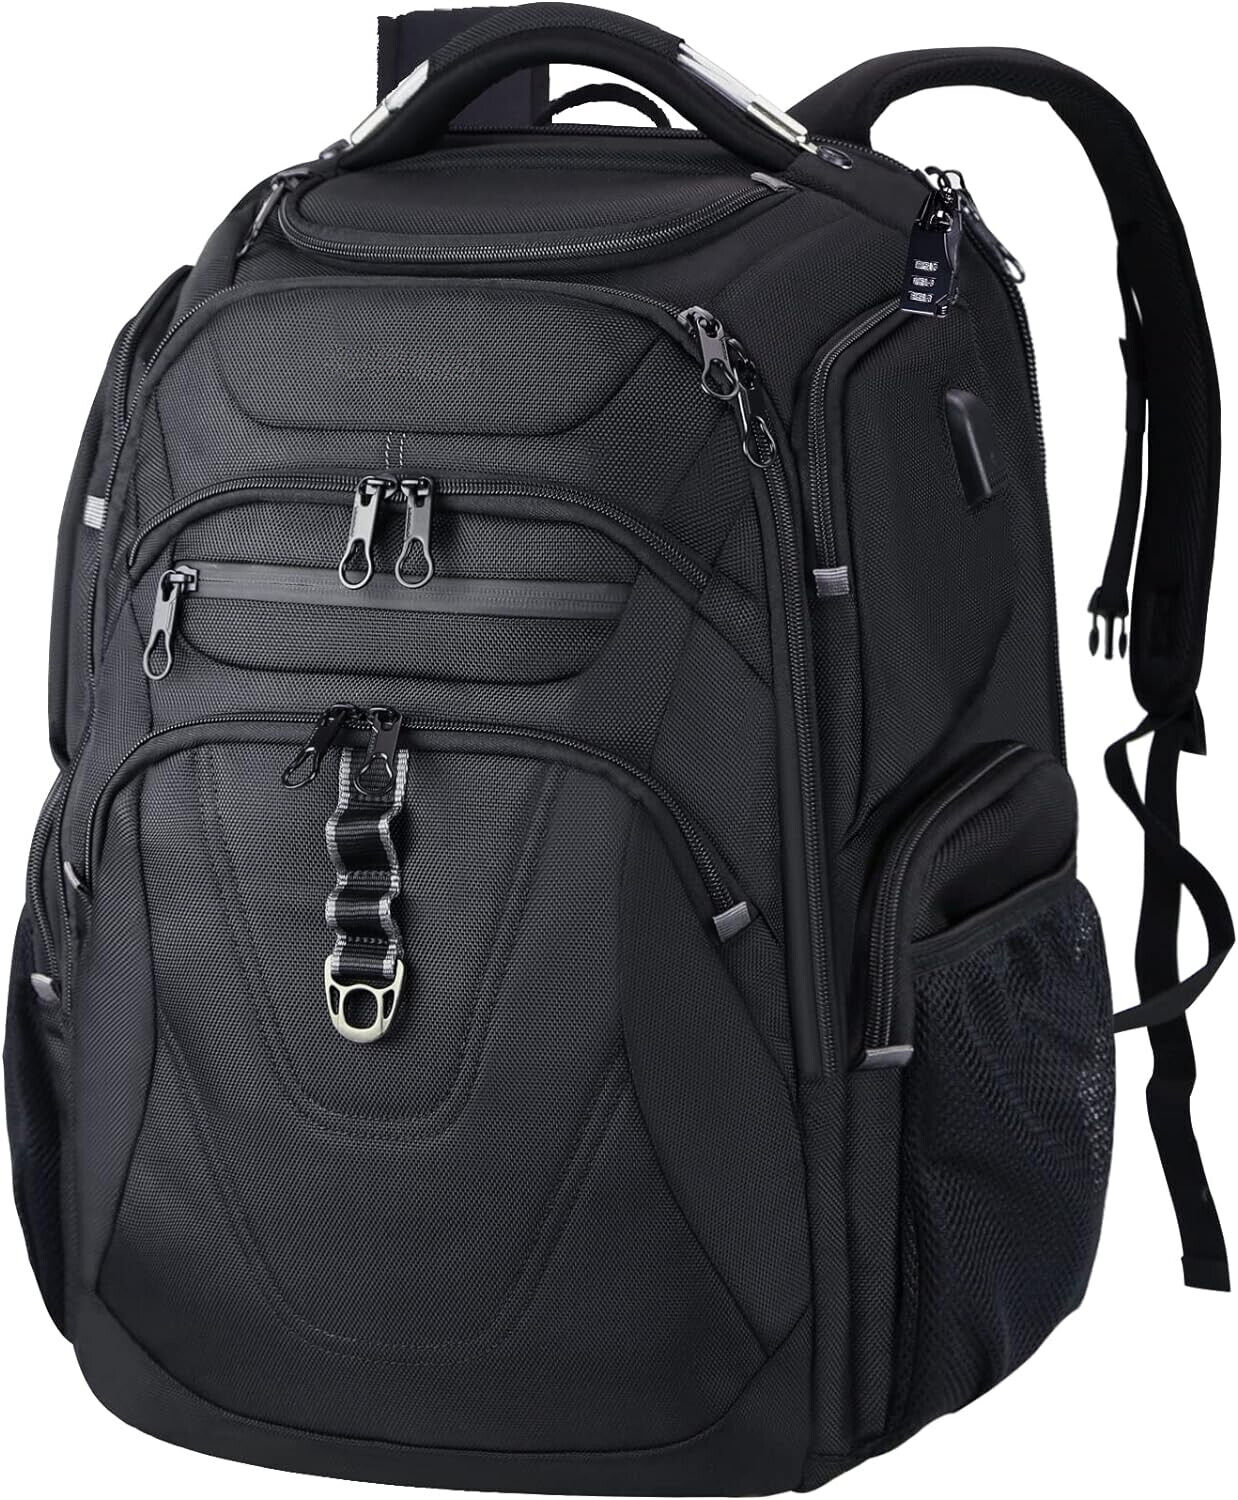  Friendly Travel Laptop Backpack 18.4 inch XXXL Gaming Backpack Water